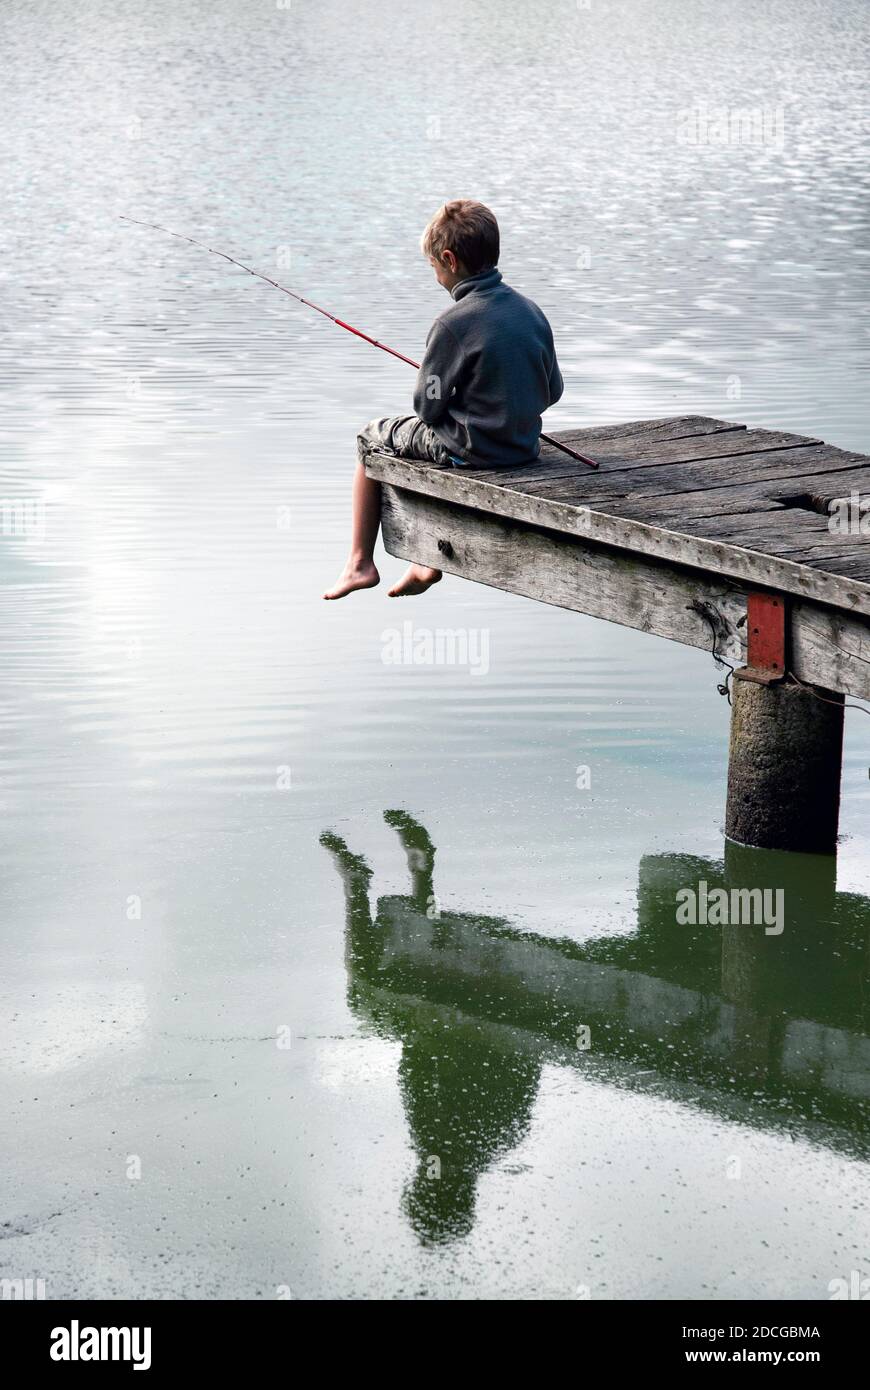 Small boy fishing in pond with cane rod and reflection while